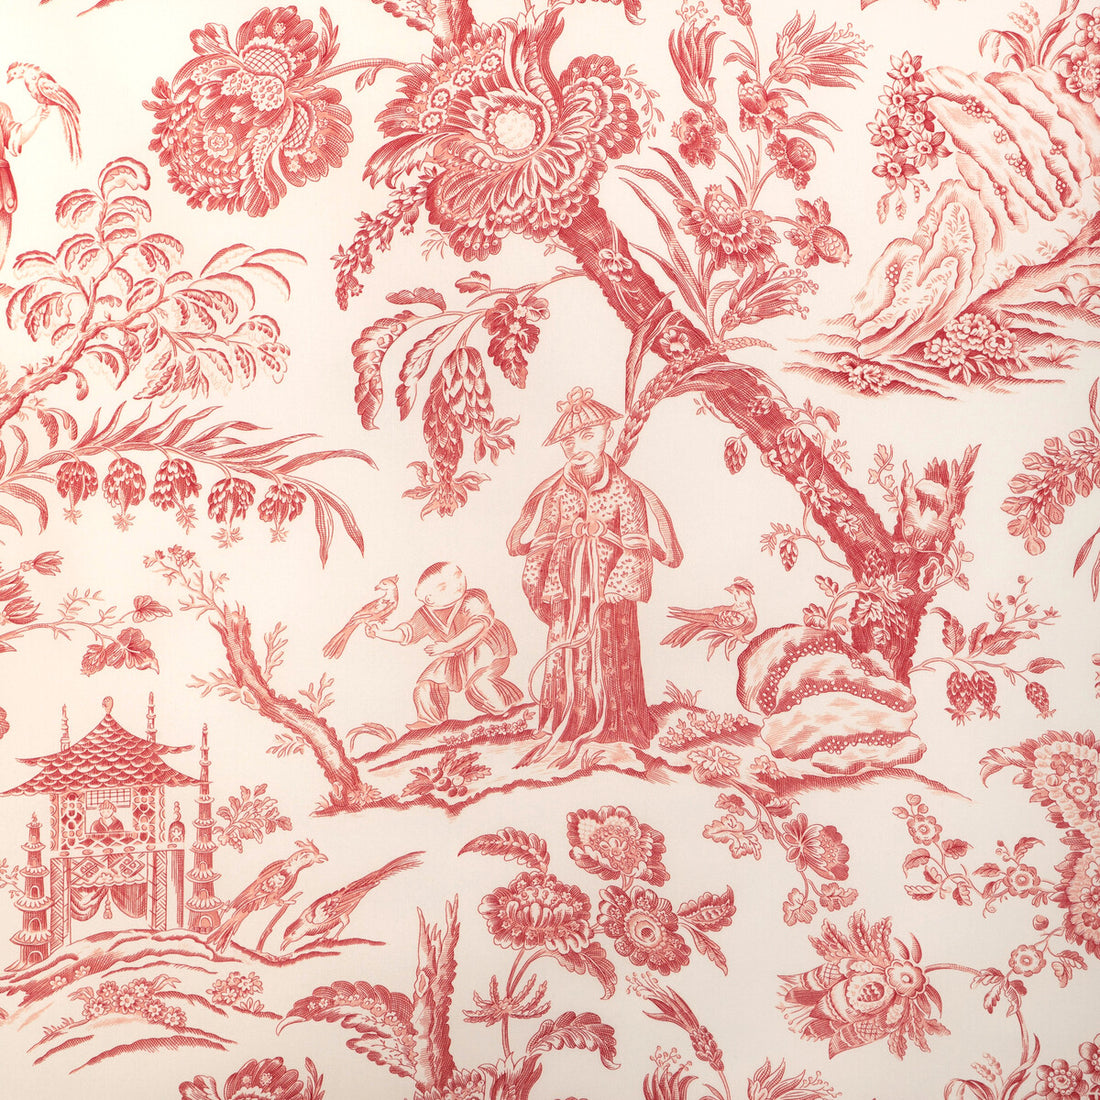 Marcel Print fabric in red color - pattern 8023104.19.0 - by Brunschwig &amp; Fils in the Cadenet collection